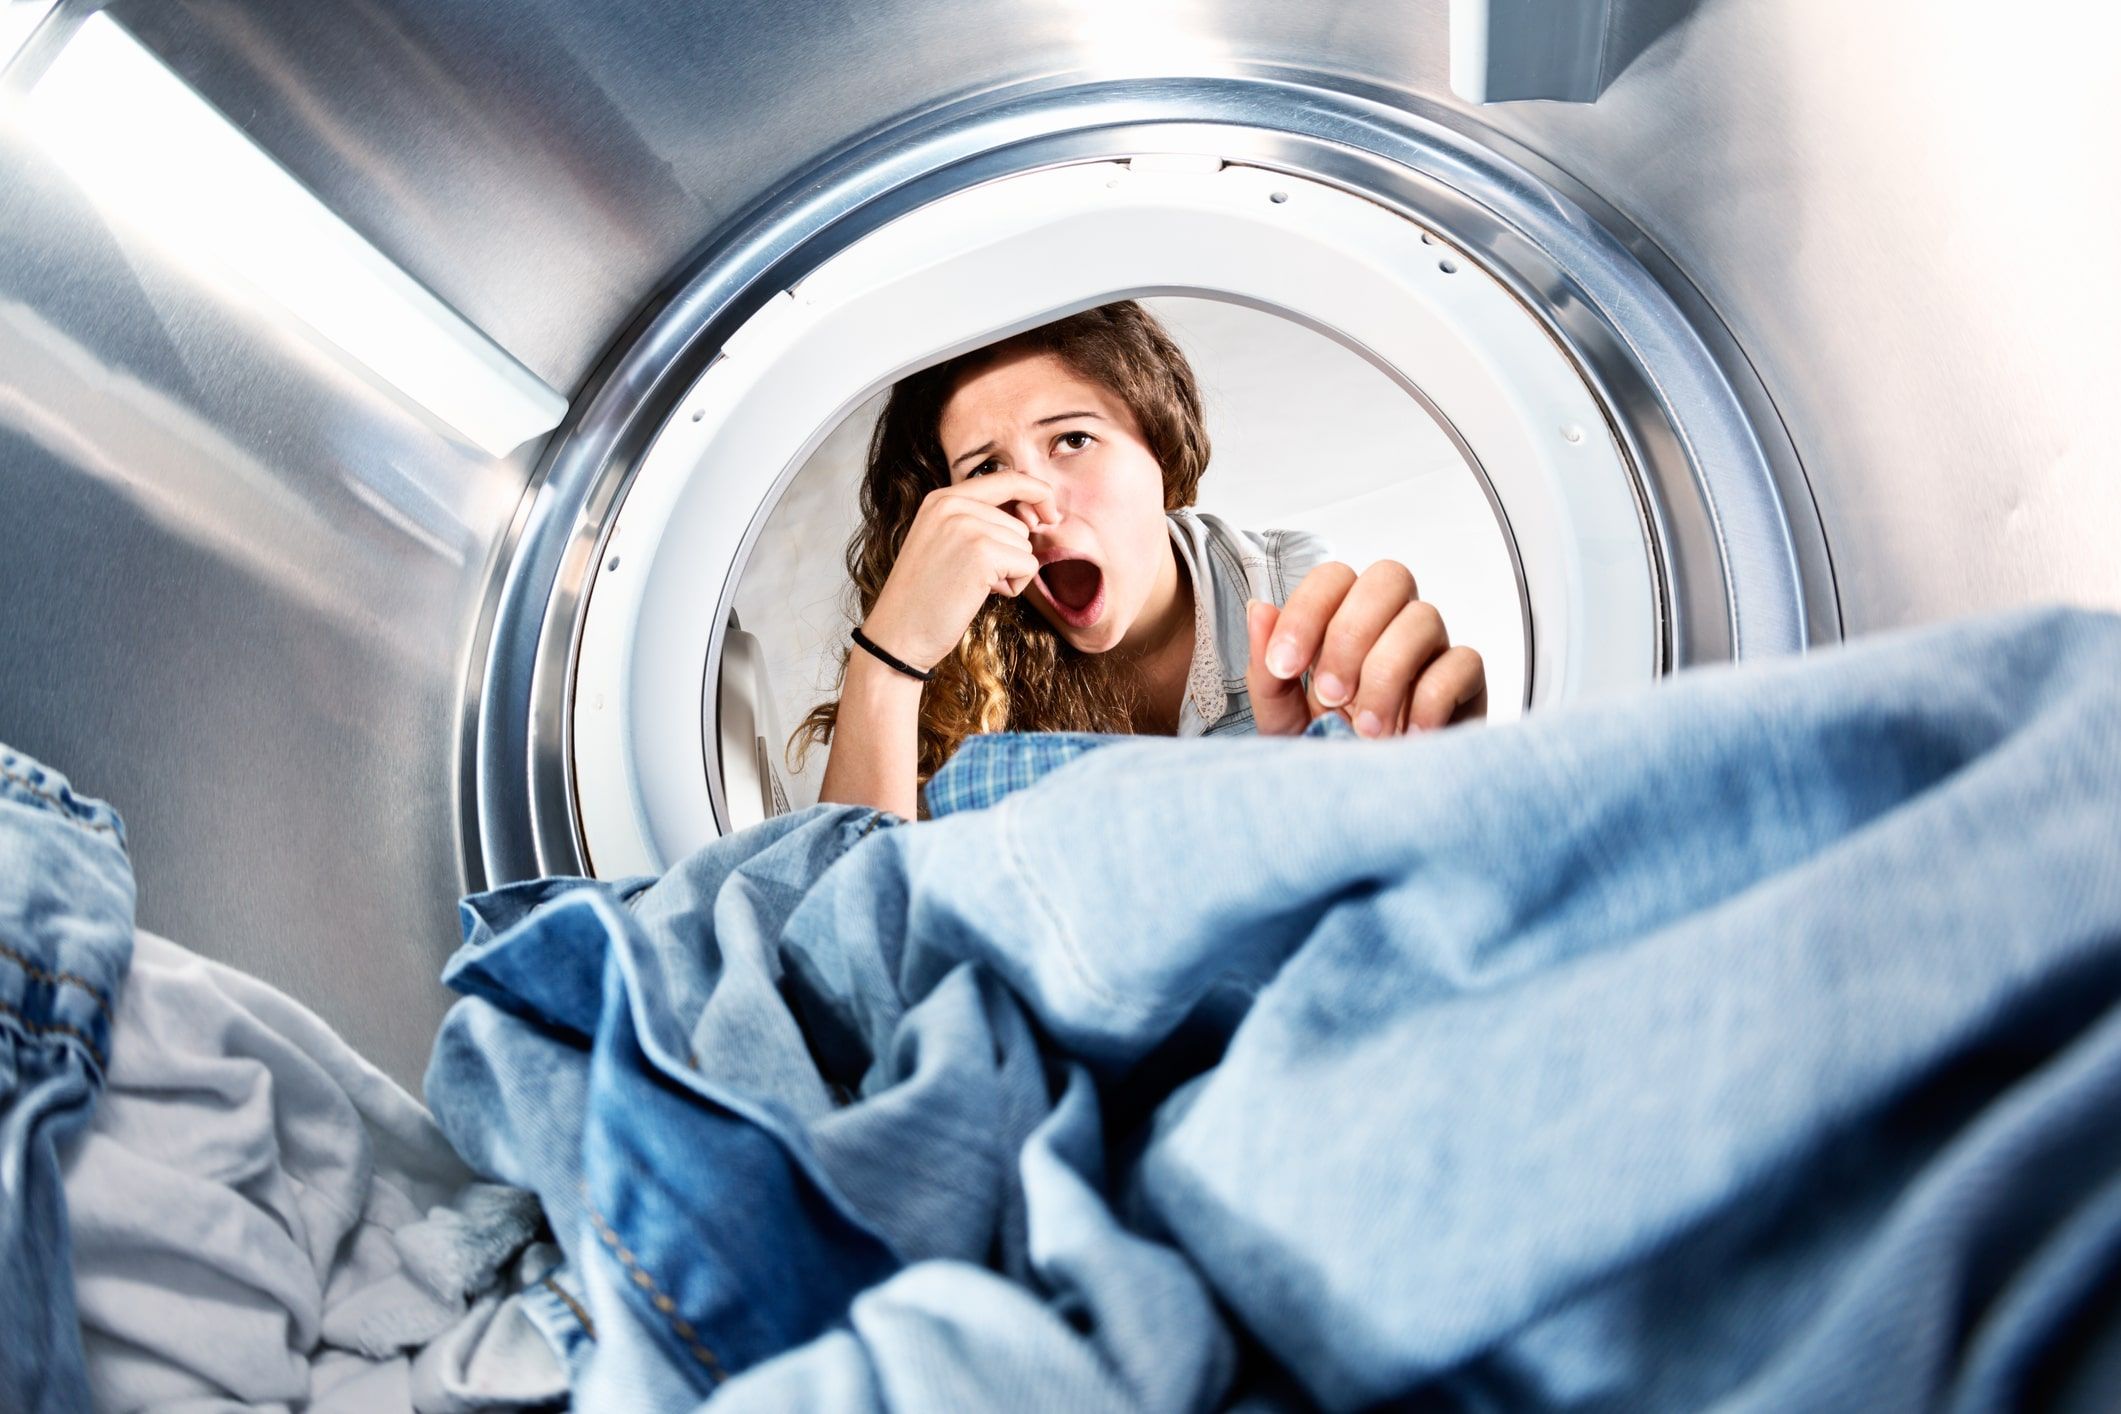 WHAT TO DO IF YOUR DRYER SMELLS LIKE BURNING?